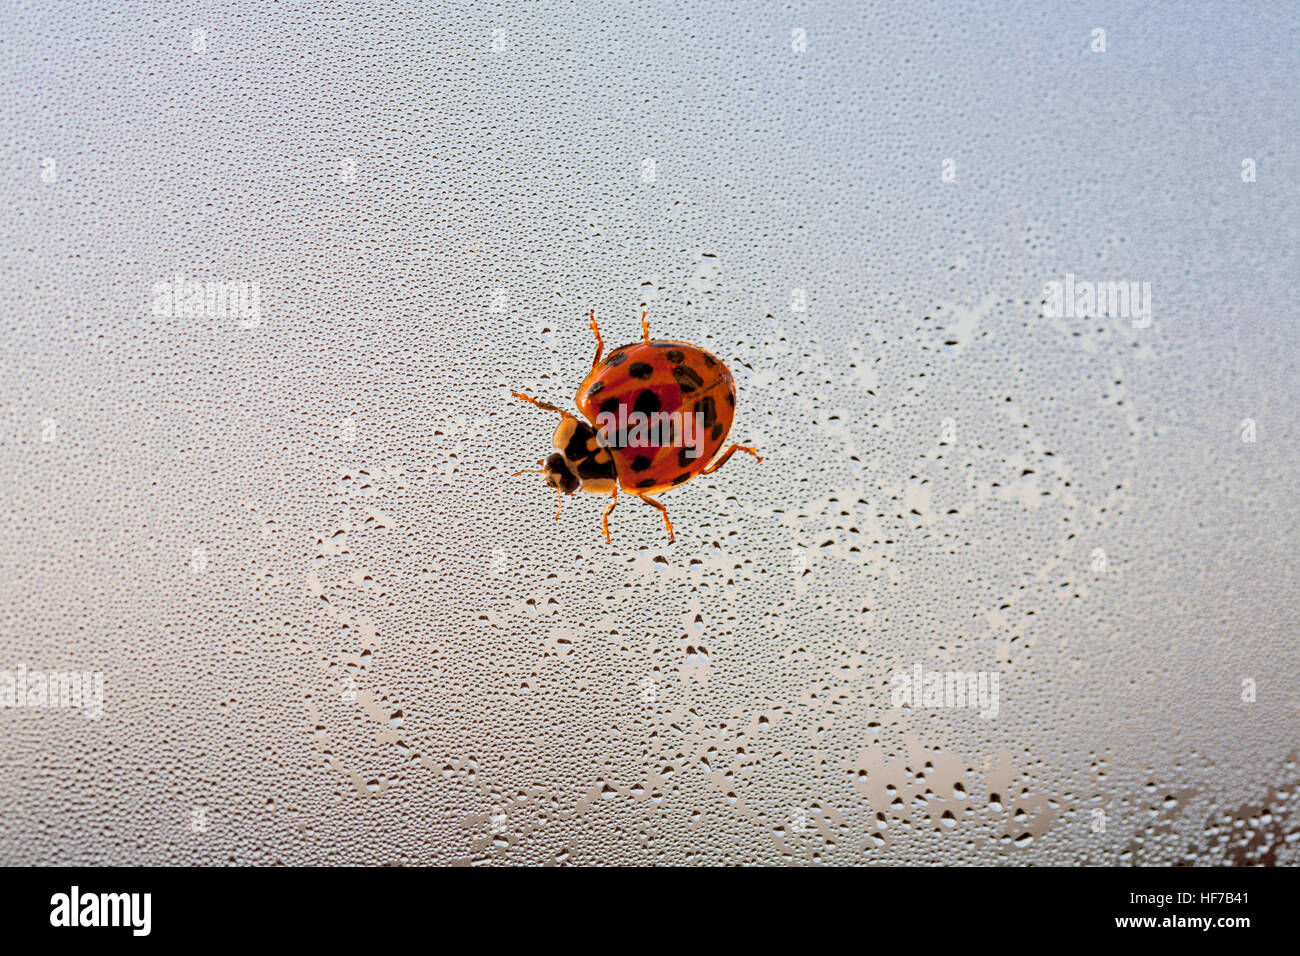 A single black spotted on red ladybird walking on a window covered in condensation and leaving a small trail Stock Photo